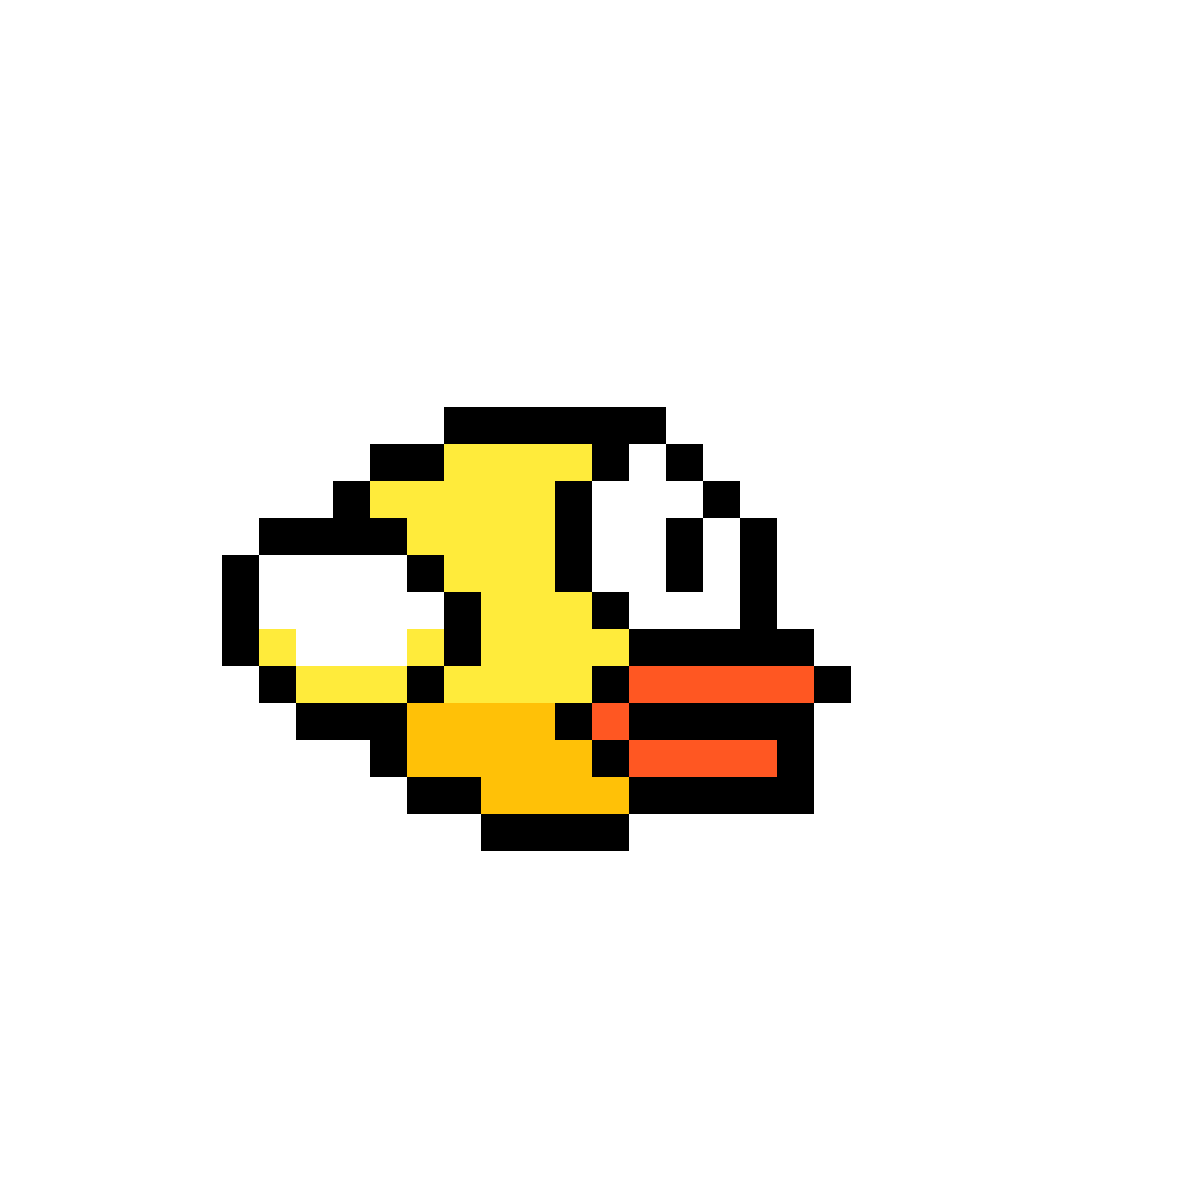 Download PNG image - Flappy Bird PNG Image 